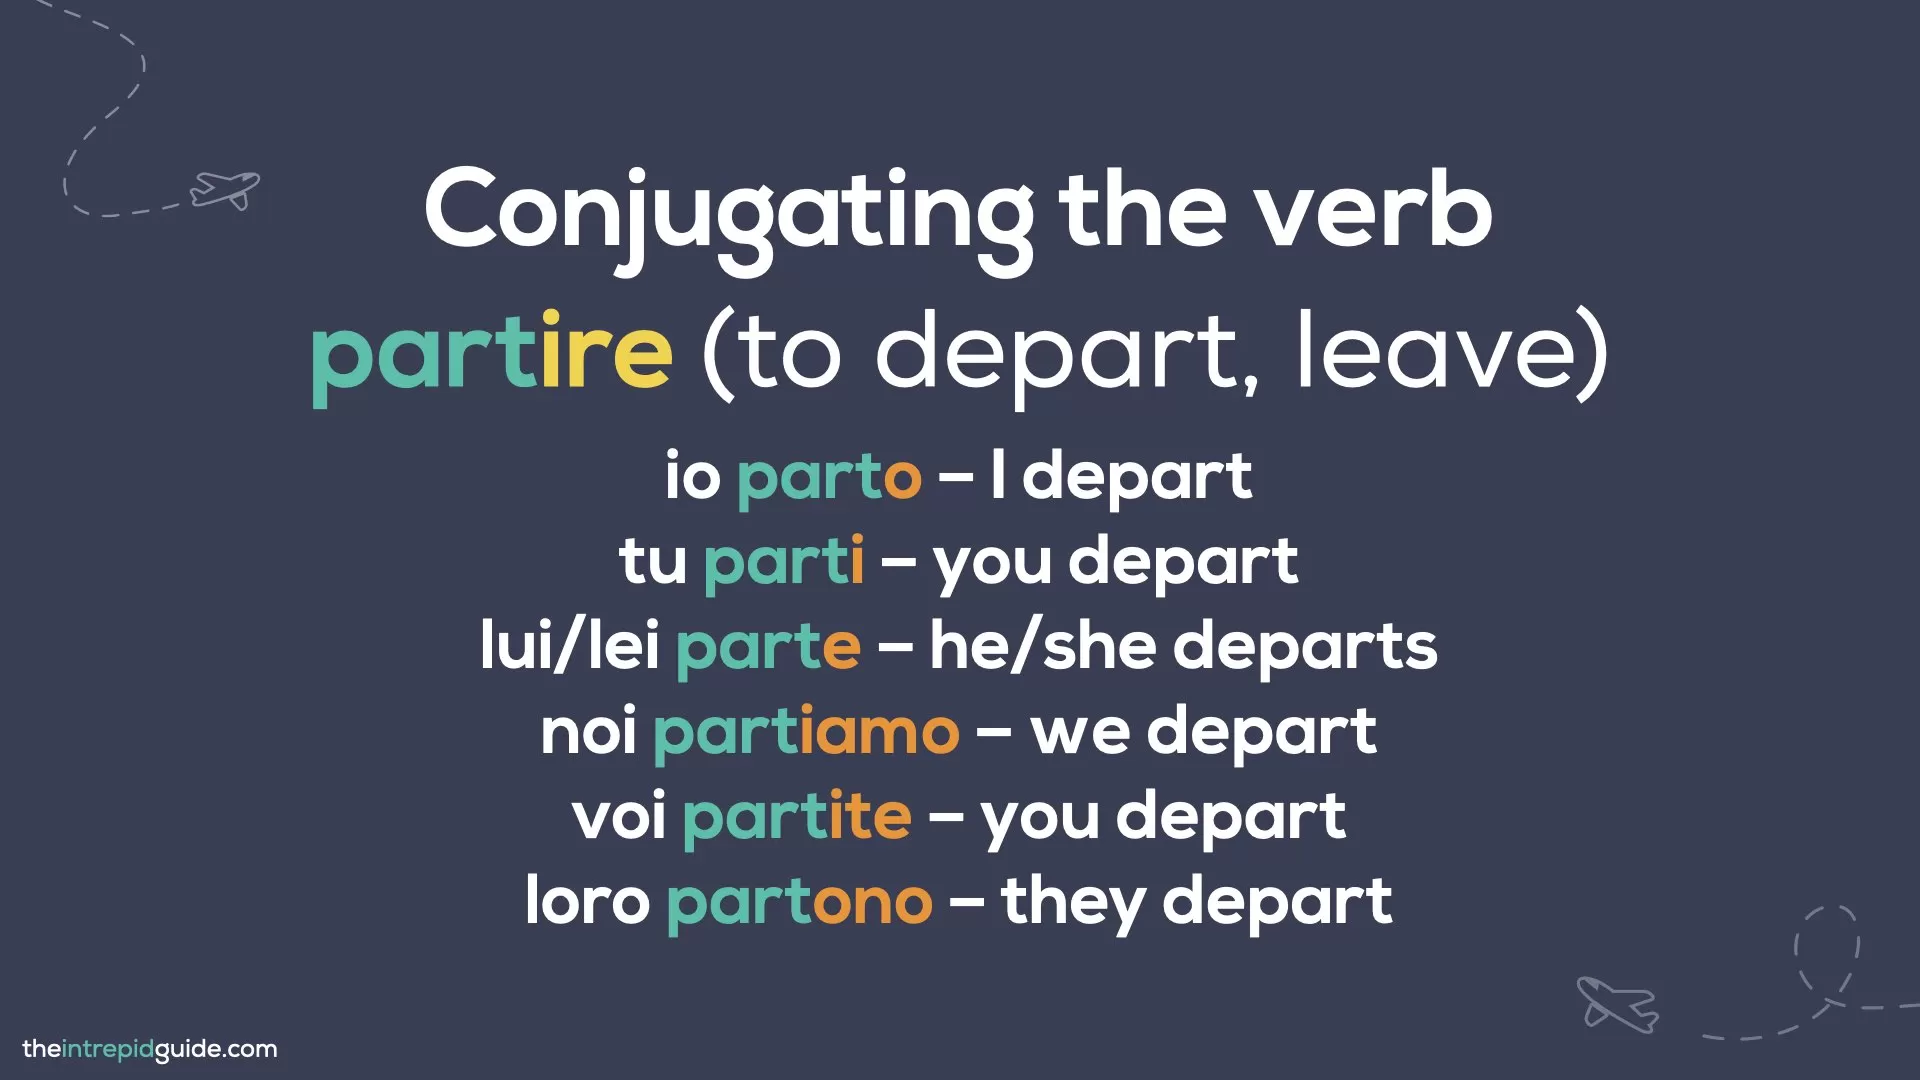 How to Conjugate Italian Verbs - Conjugating the verb partire - to depart